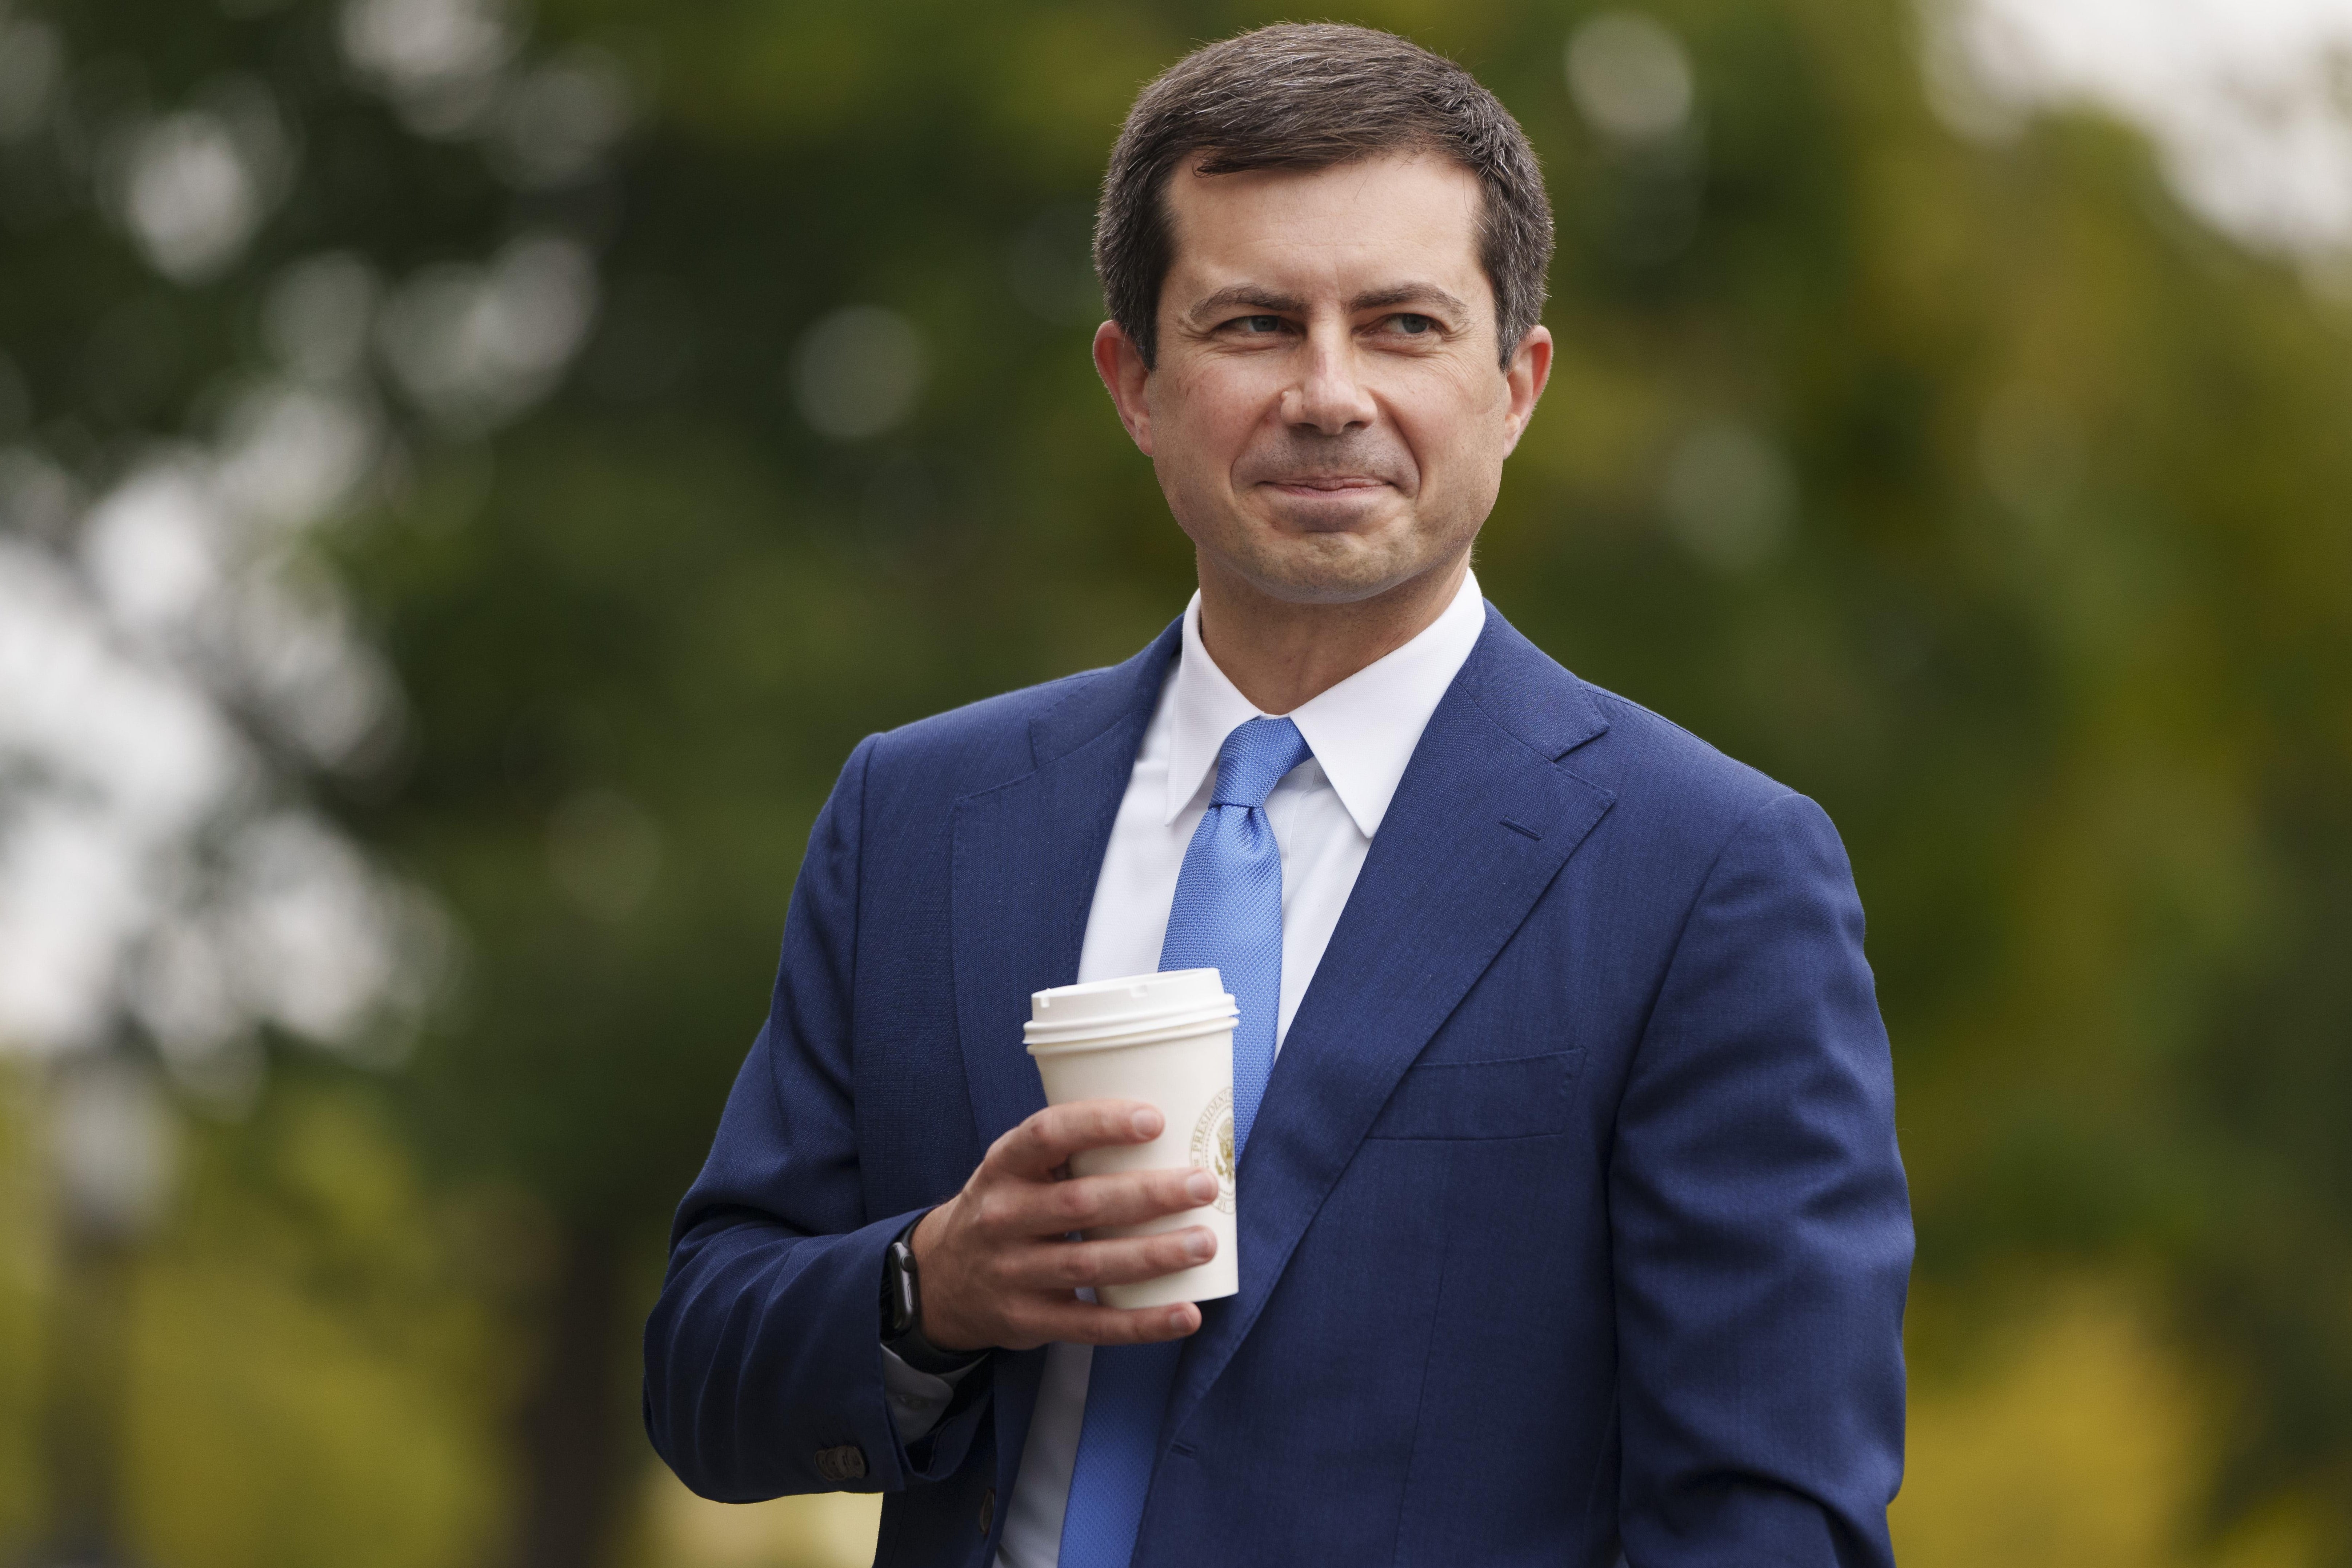 Transportation Secretary Pete Buttigieg arrives for a television interview with CNBC outside the White House October 13, 2021 in Washington, D.C.